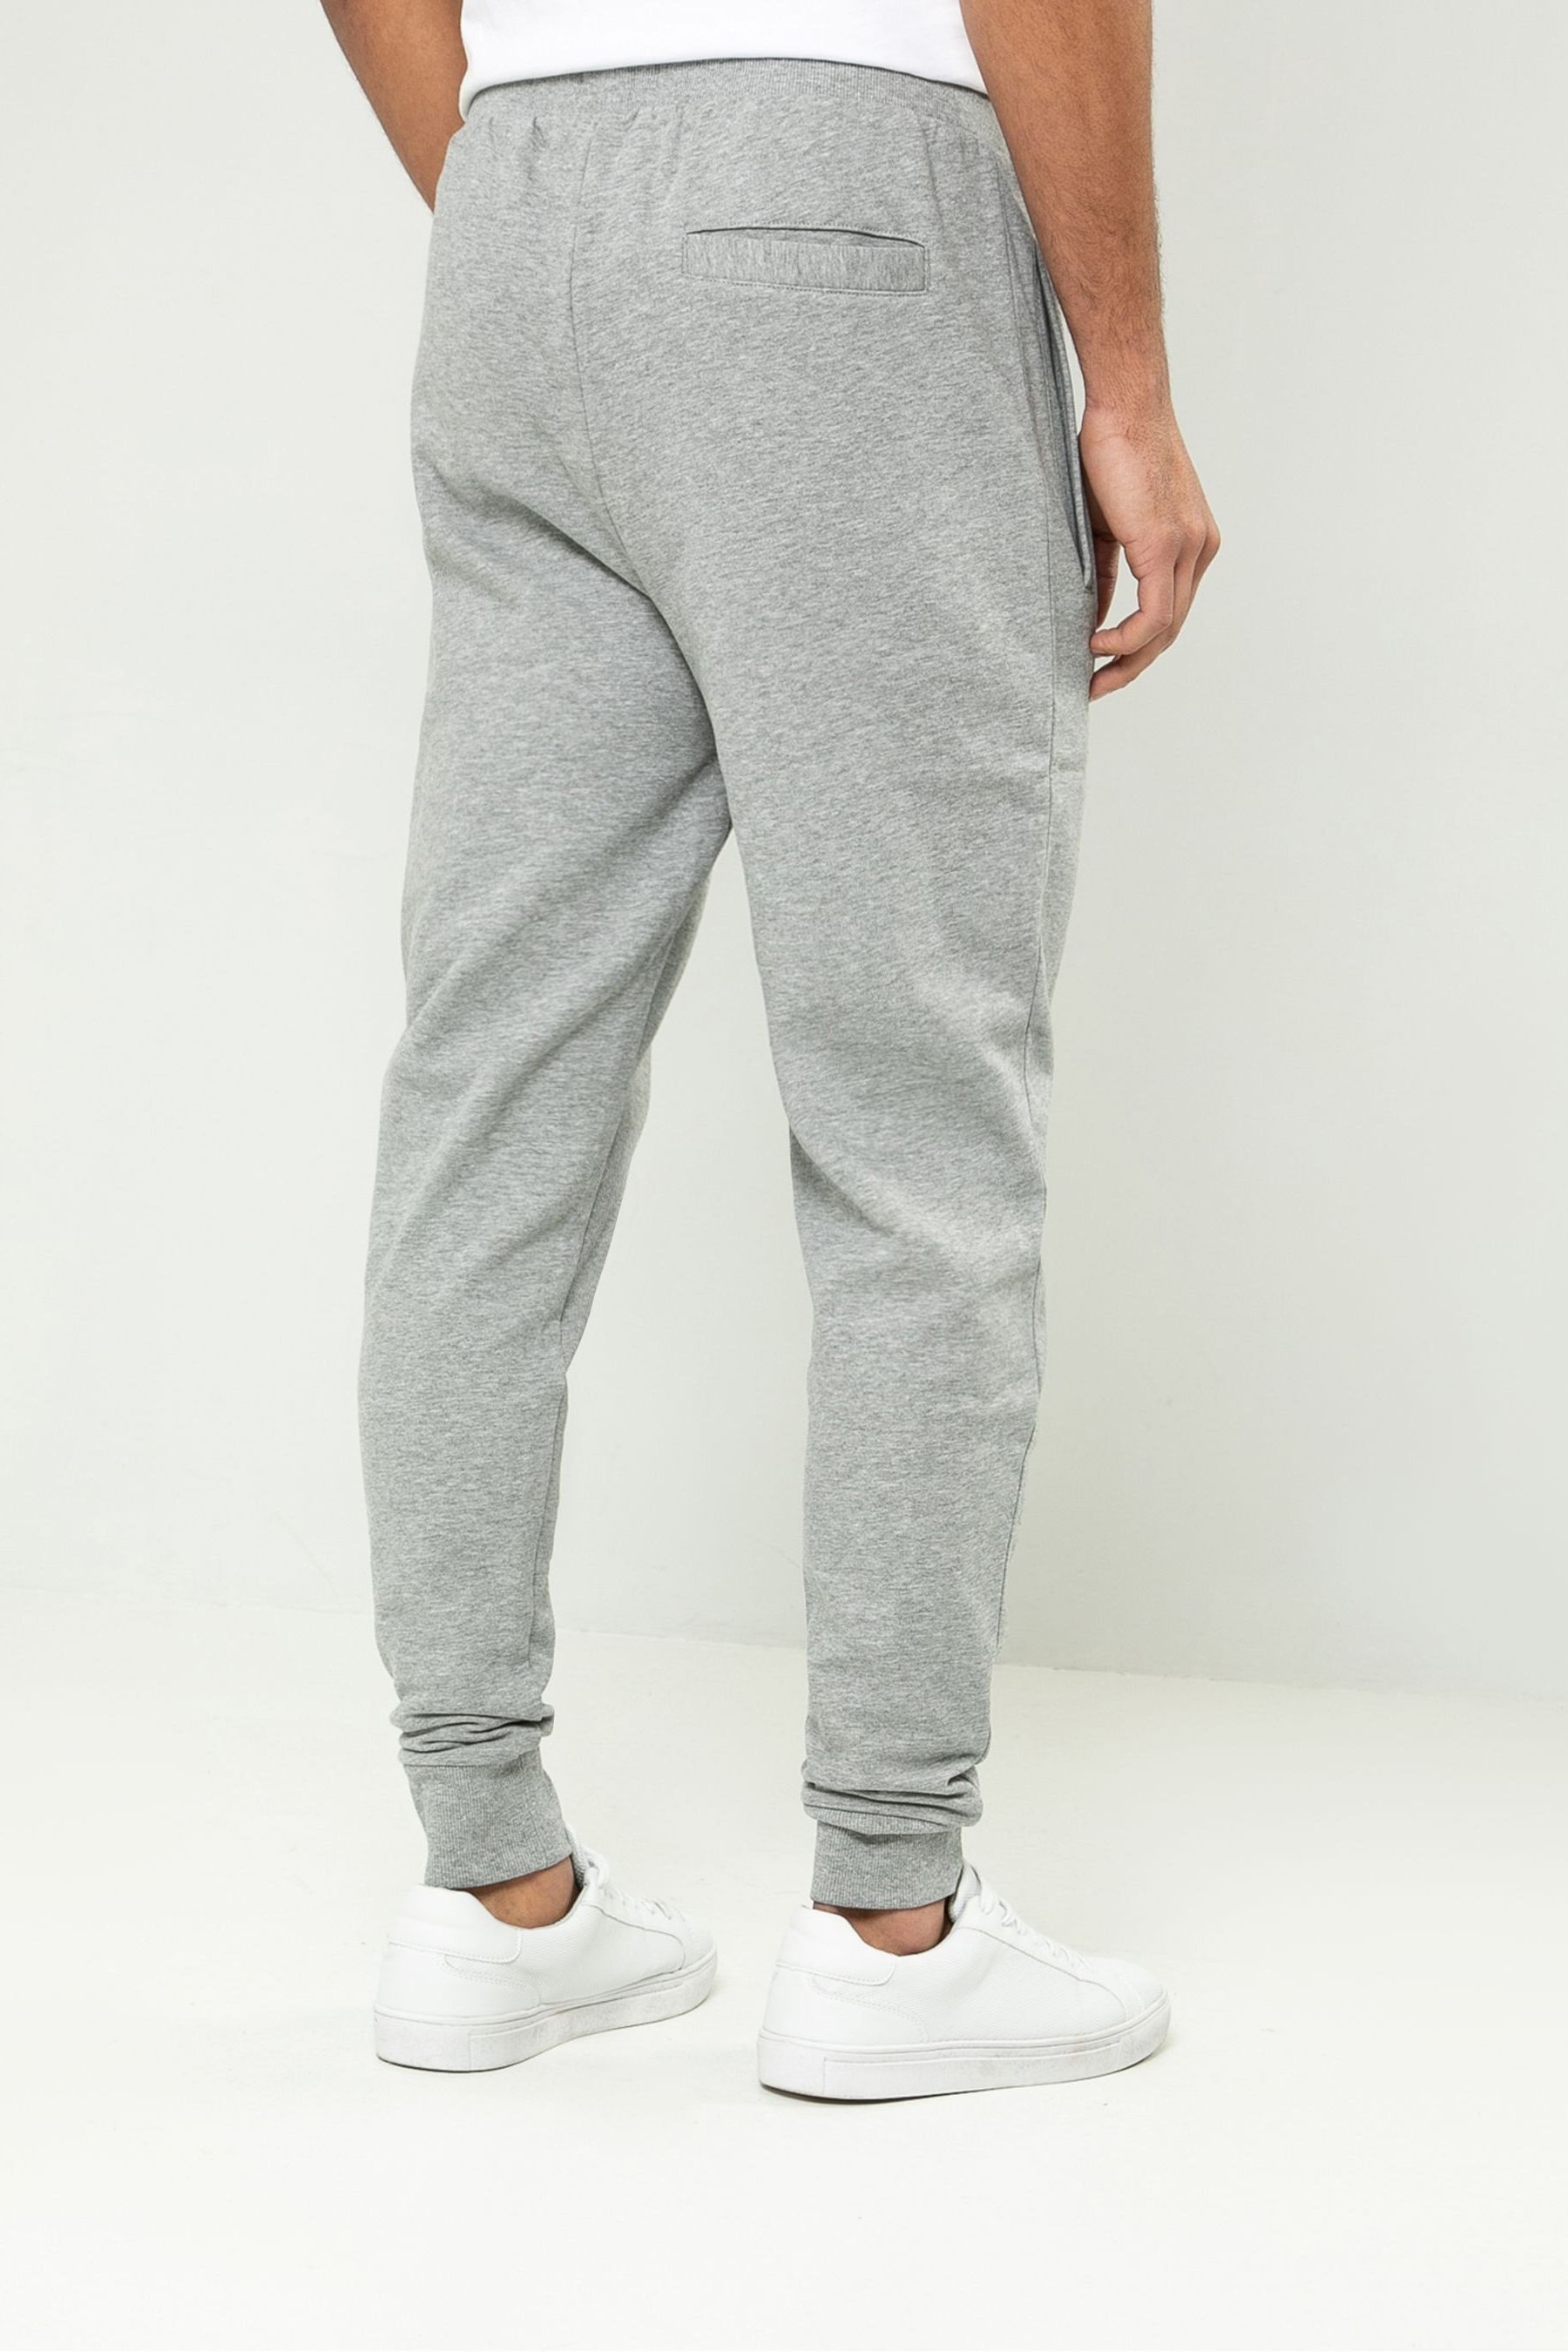 Buy Threadbare Grey Cotton Blend Basic Joggers from the Next UK online shop